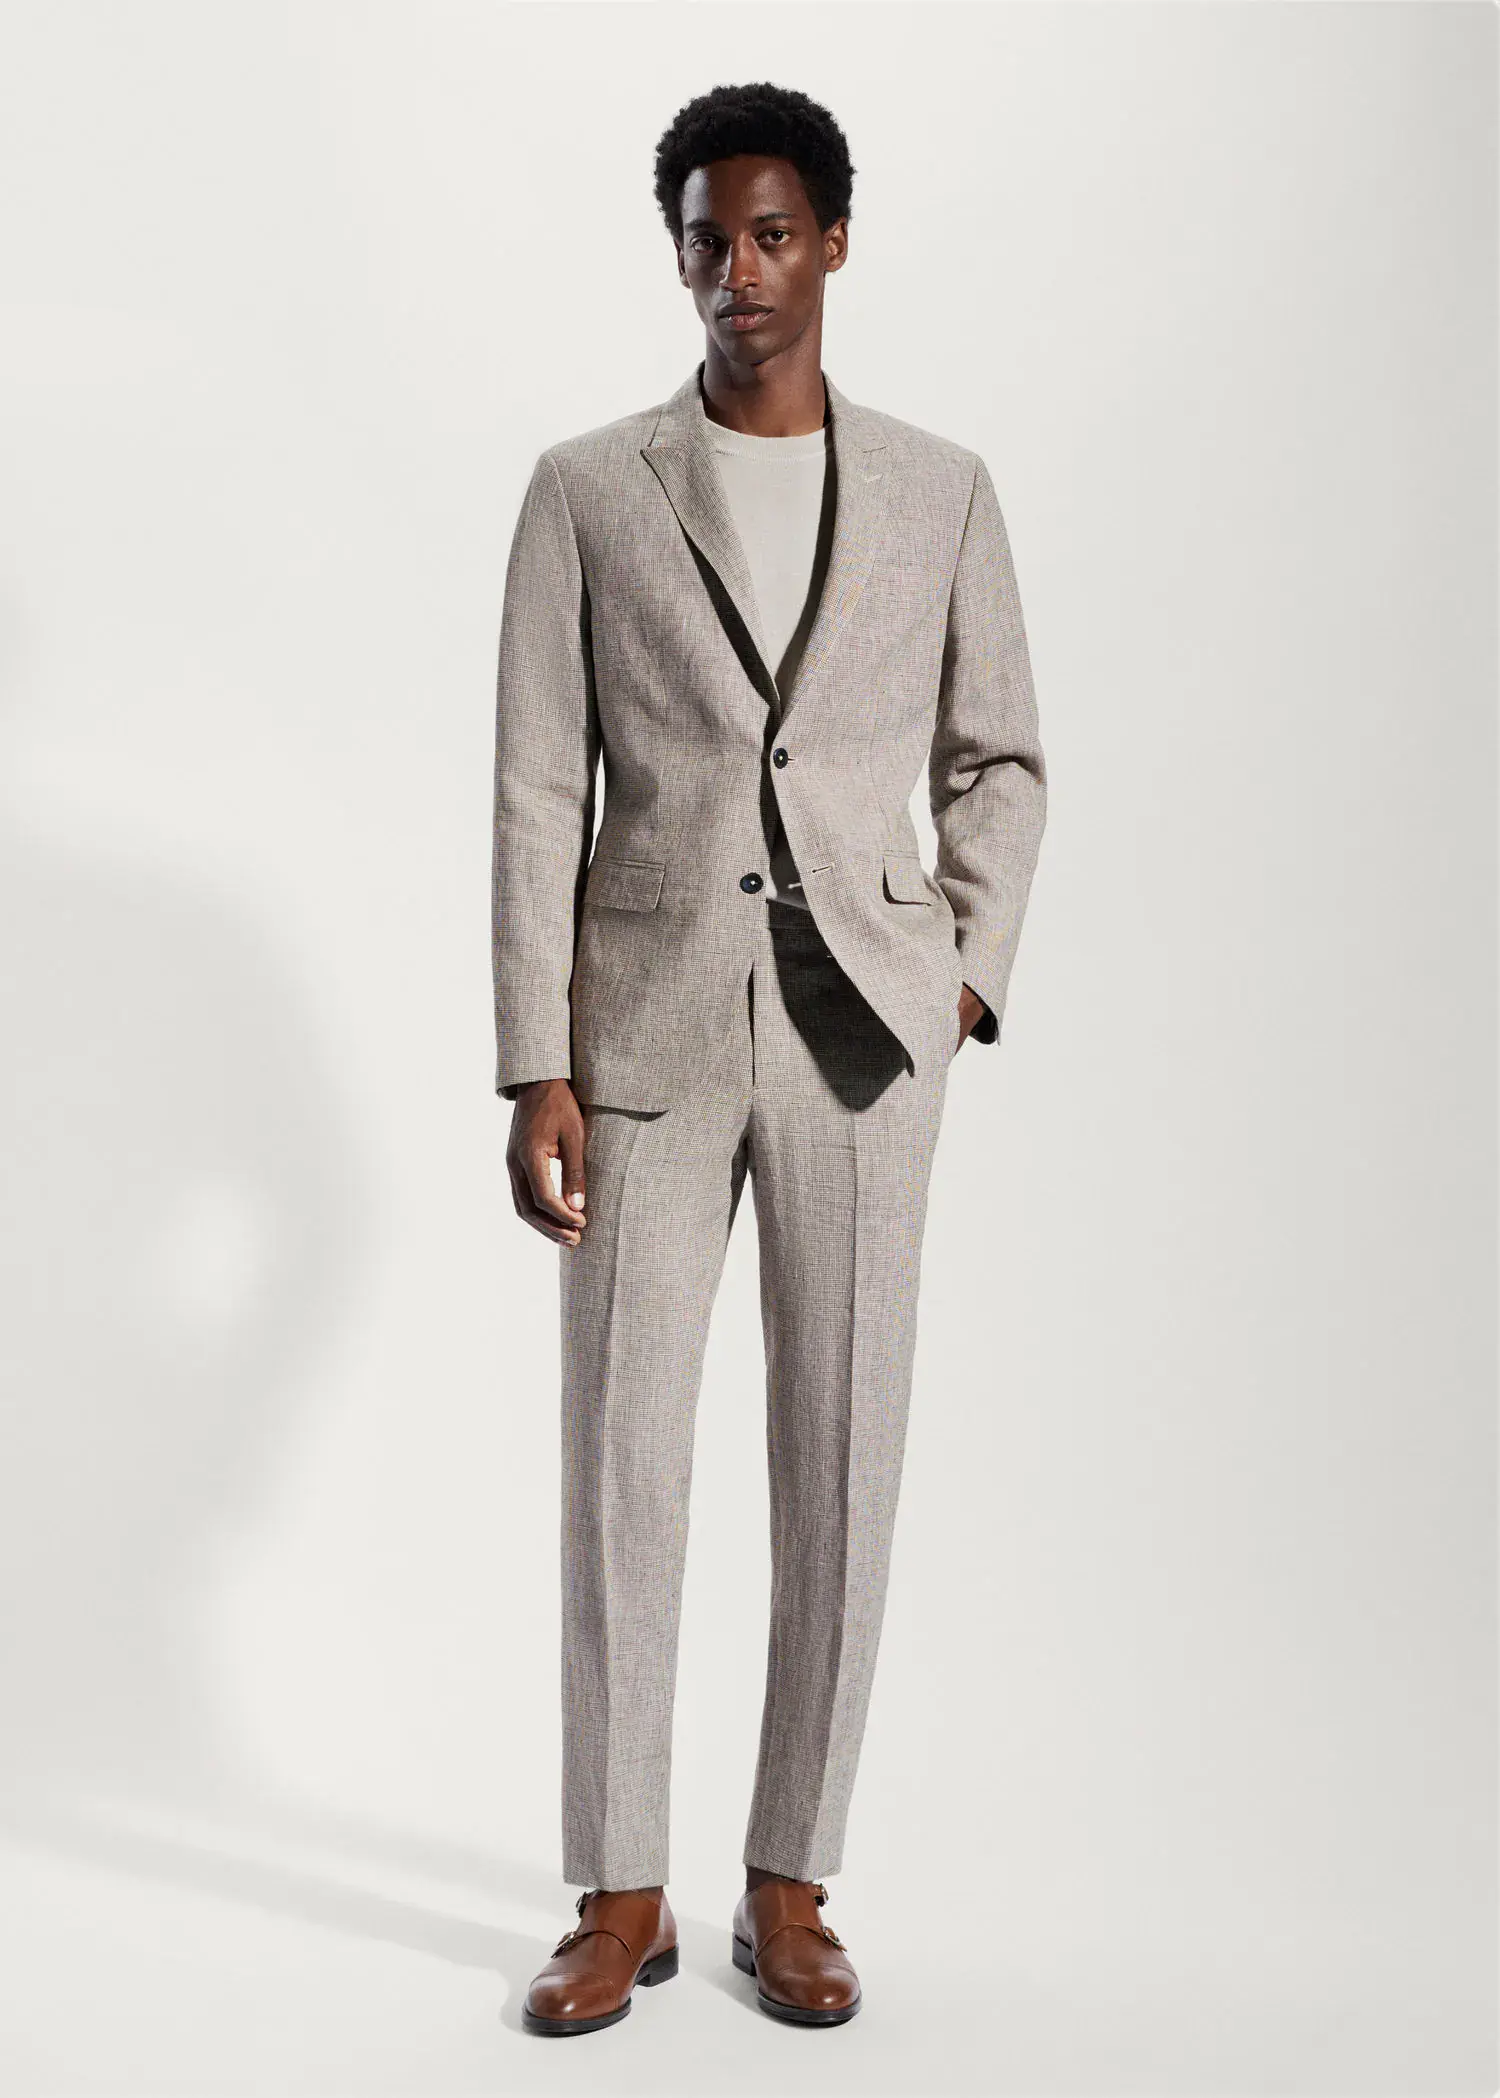 Mango Blazer suit 100% linen. a man in a suit standing in front of a white wall. 